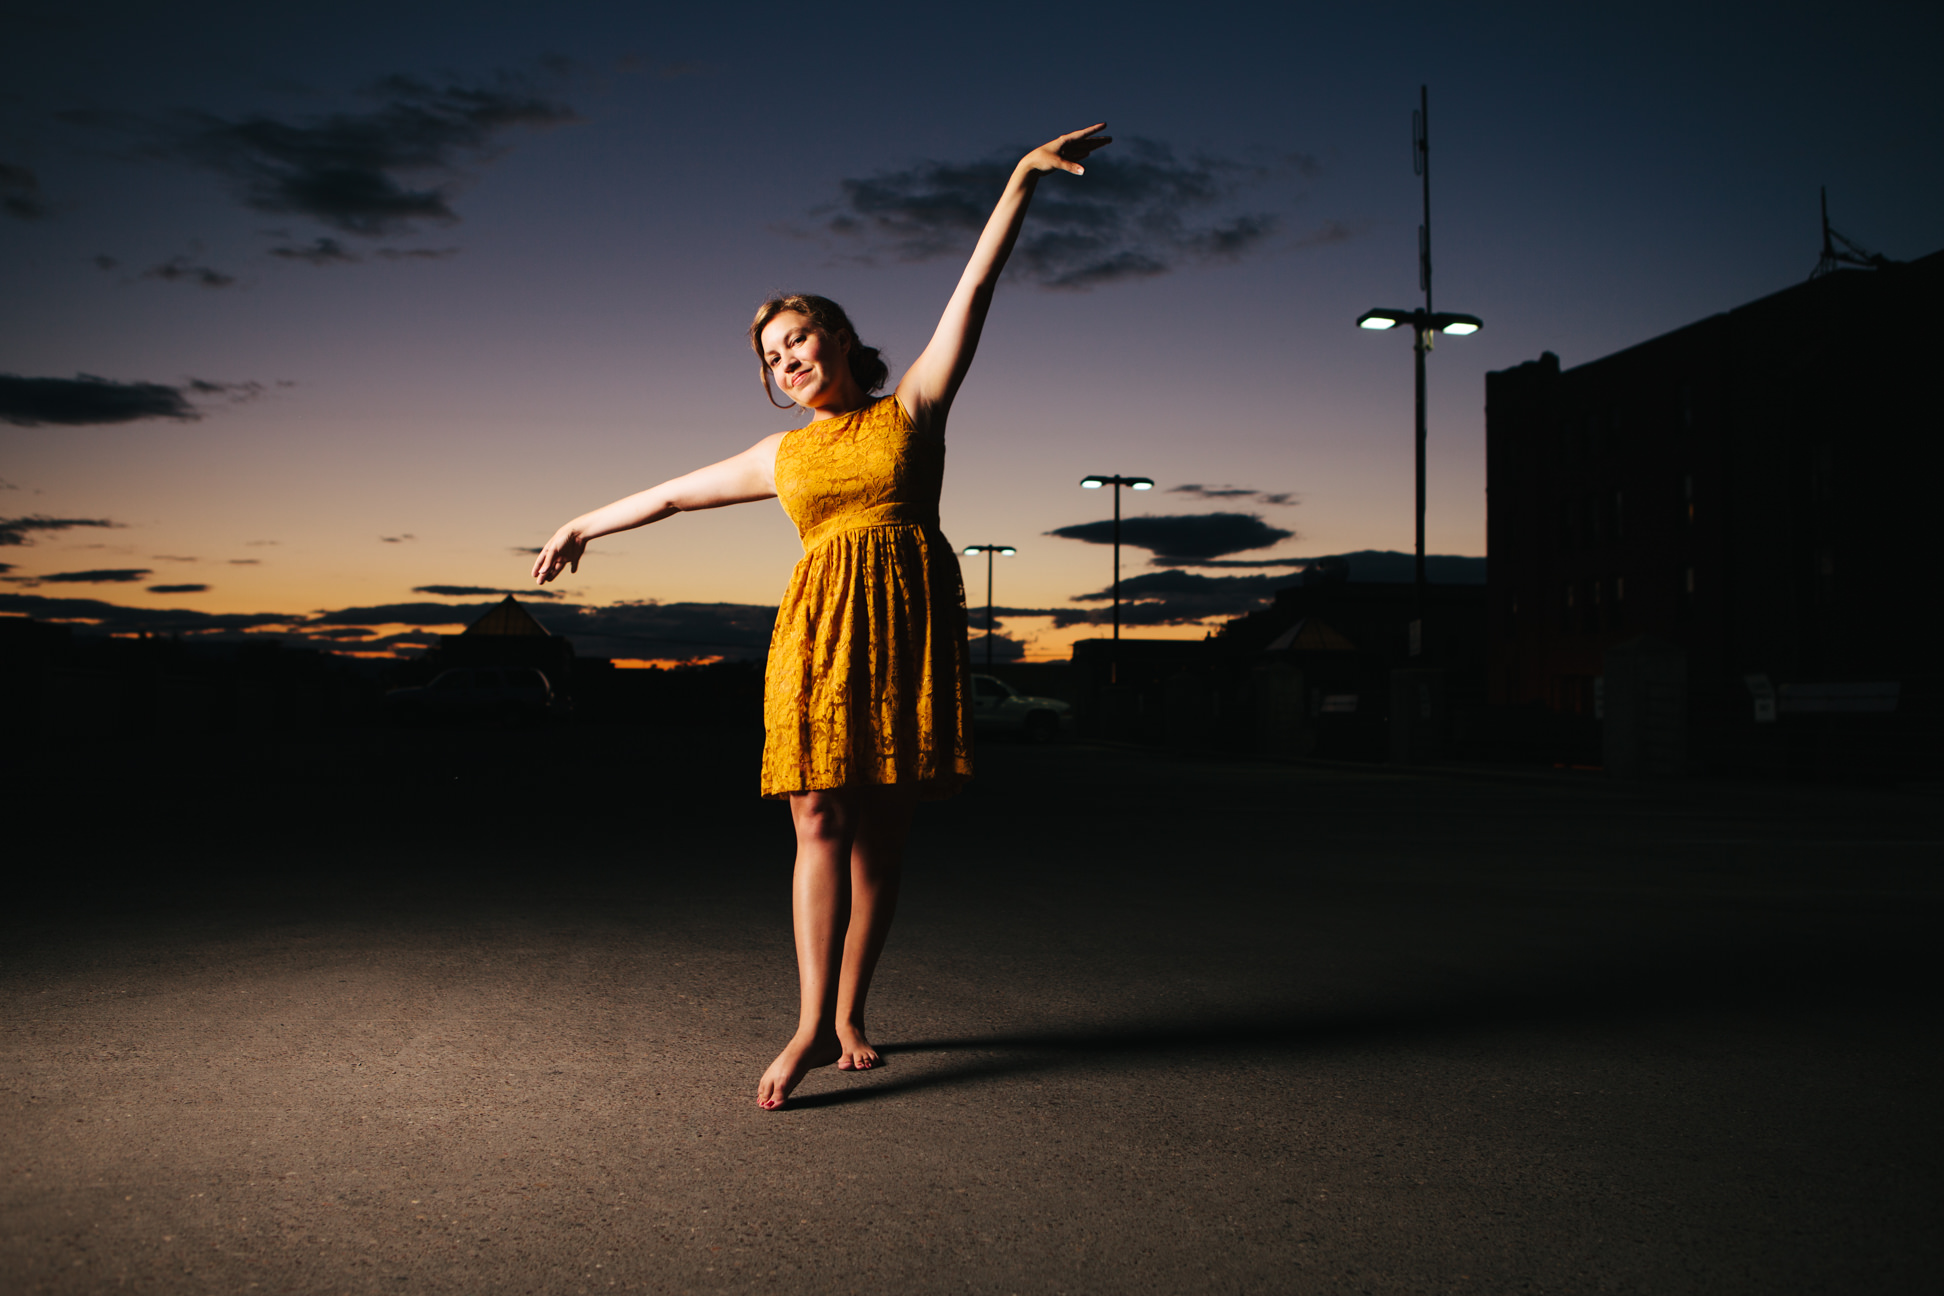 A woman dances during sunset on top of a parking garage in Missoula Montana